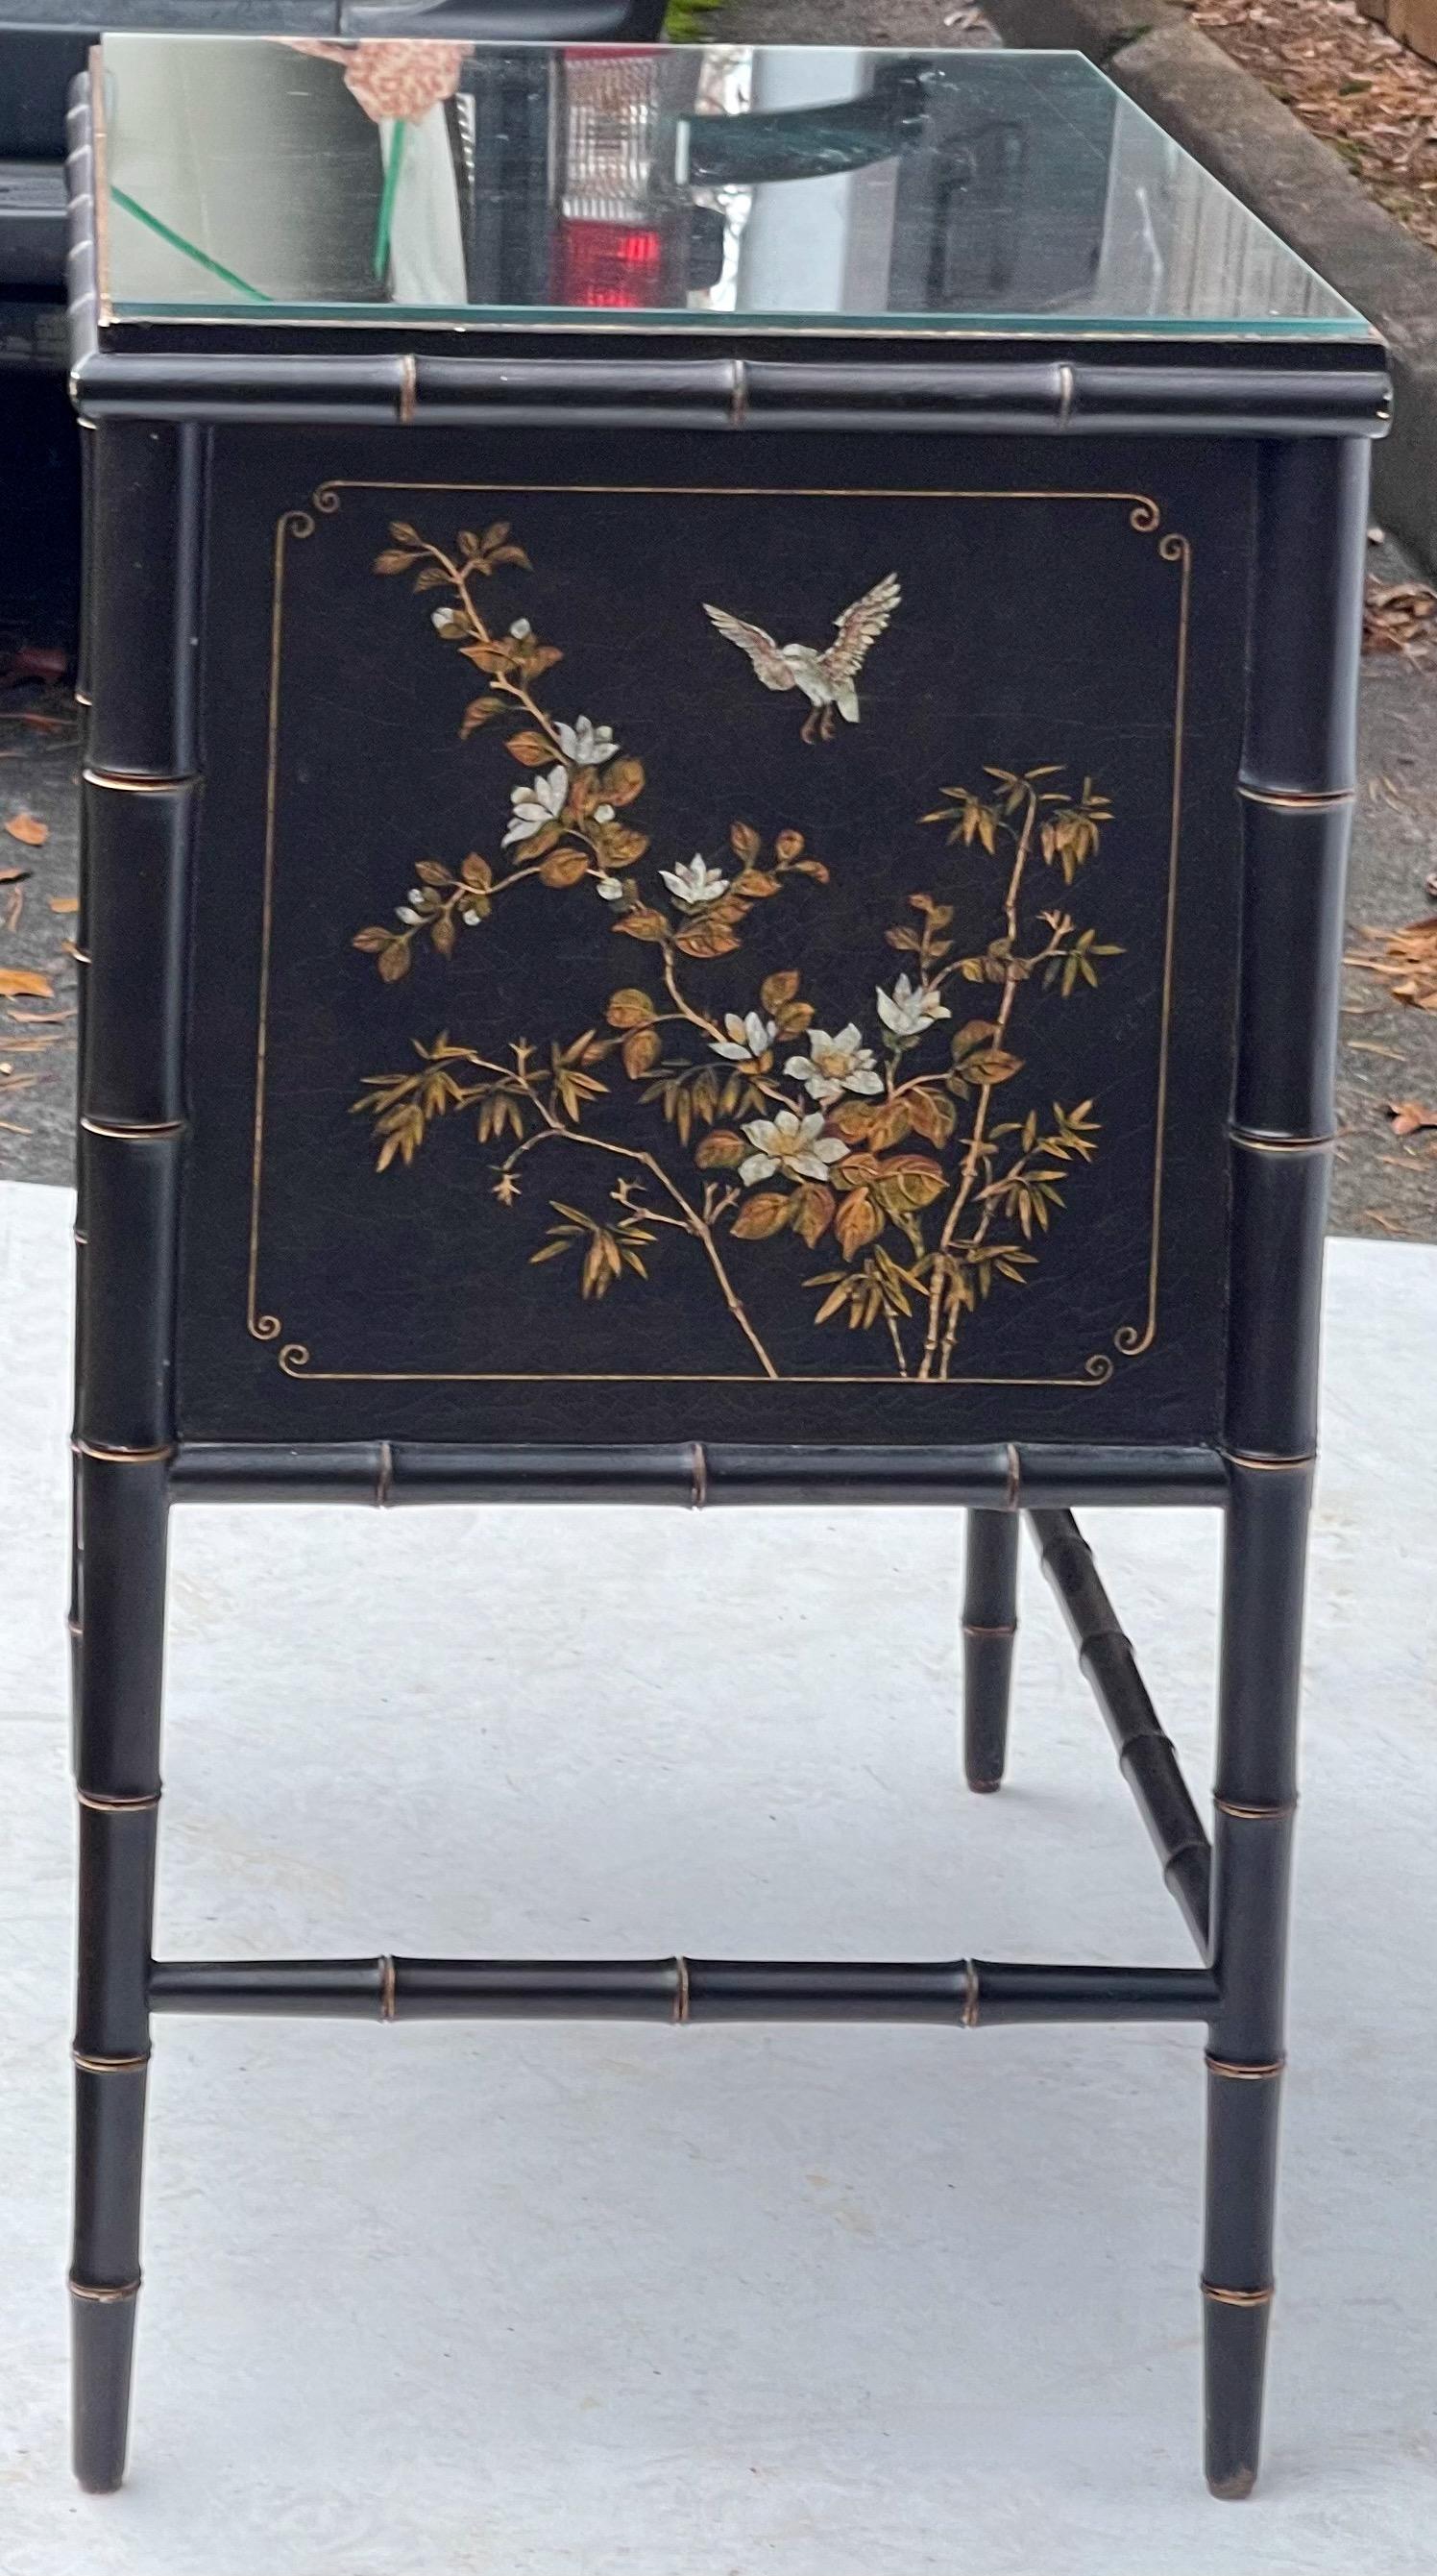 20th Century 20th-C. Regency Style Faux Bamboo and Chinoiserie Cabinets by Hickory Chair, S/2